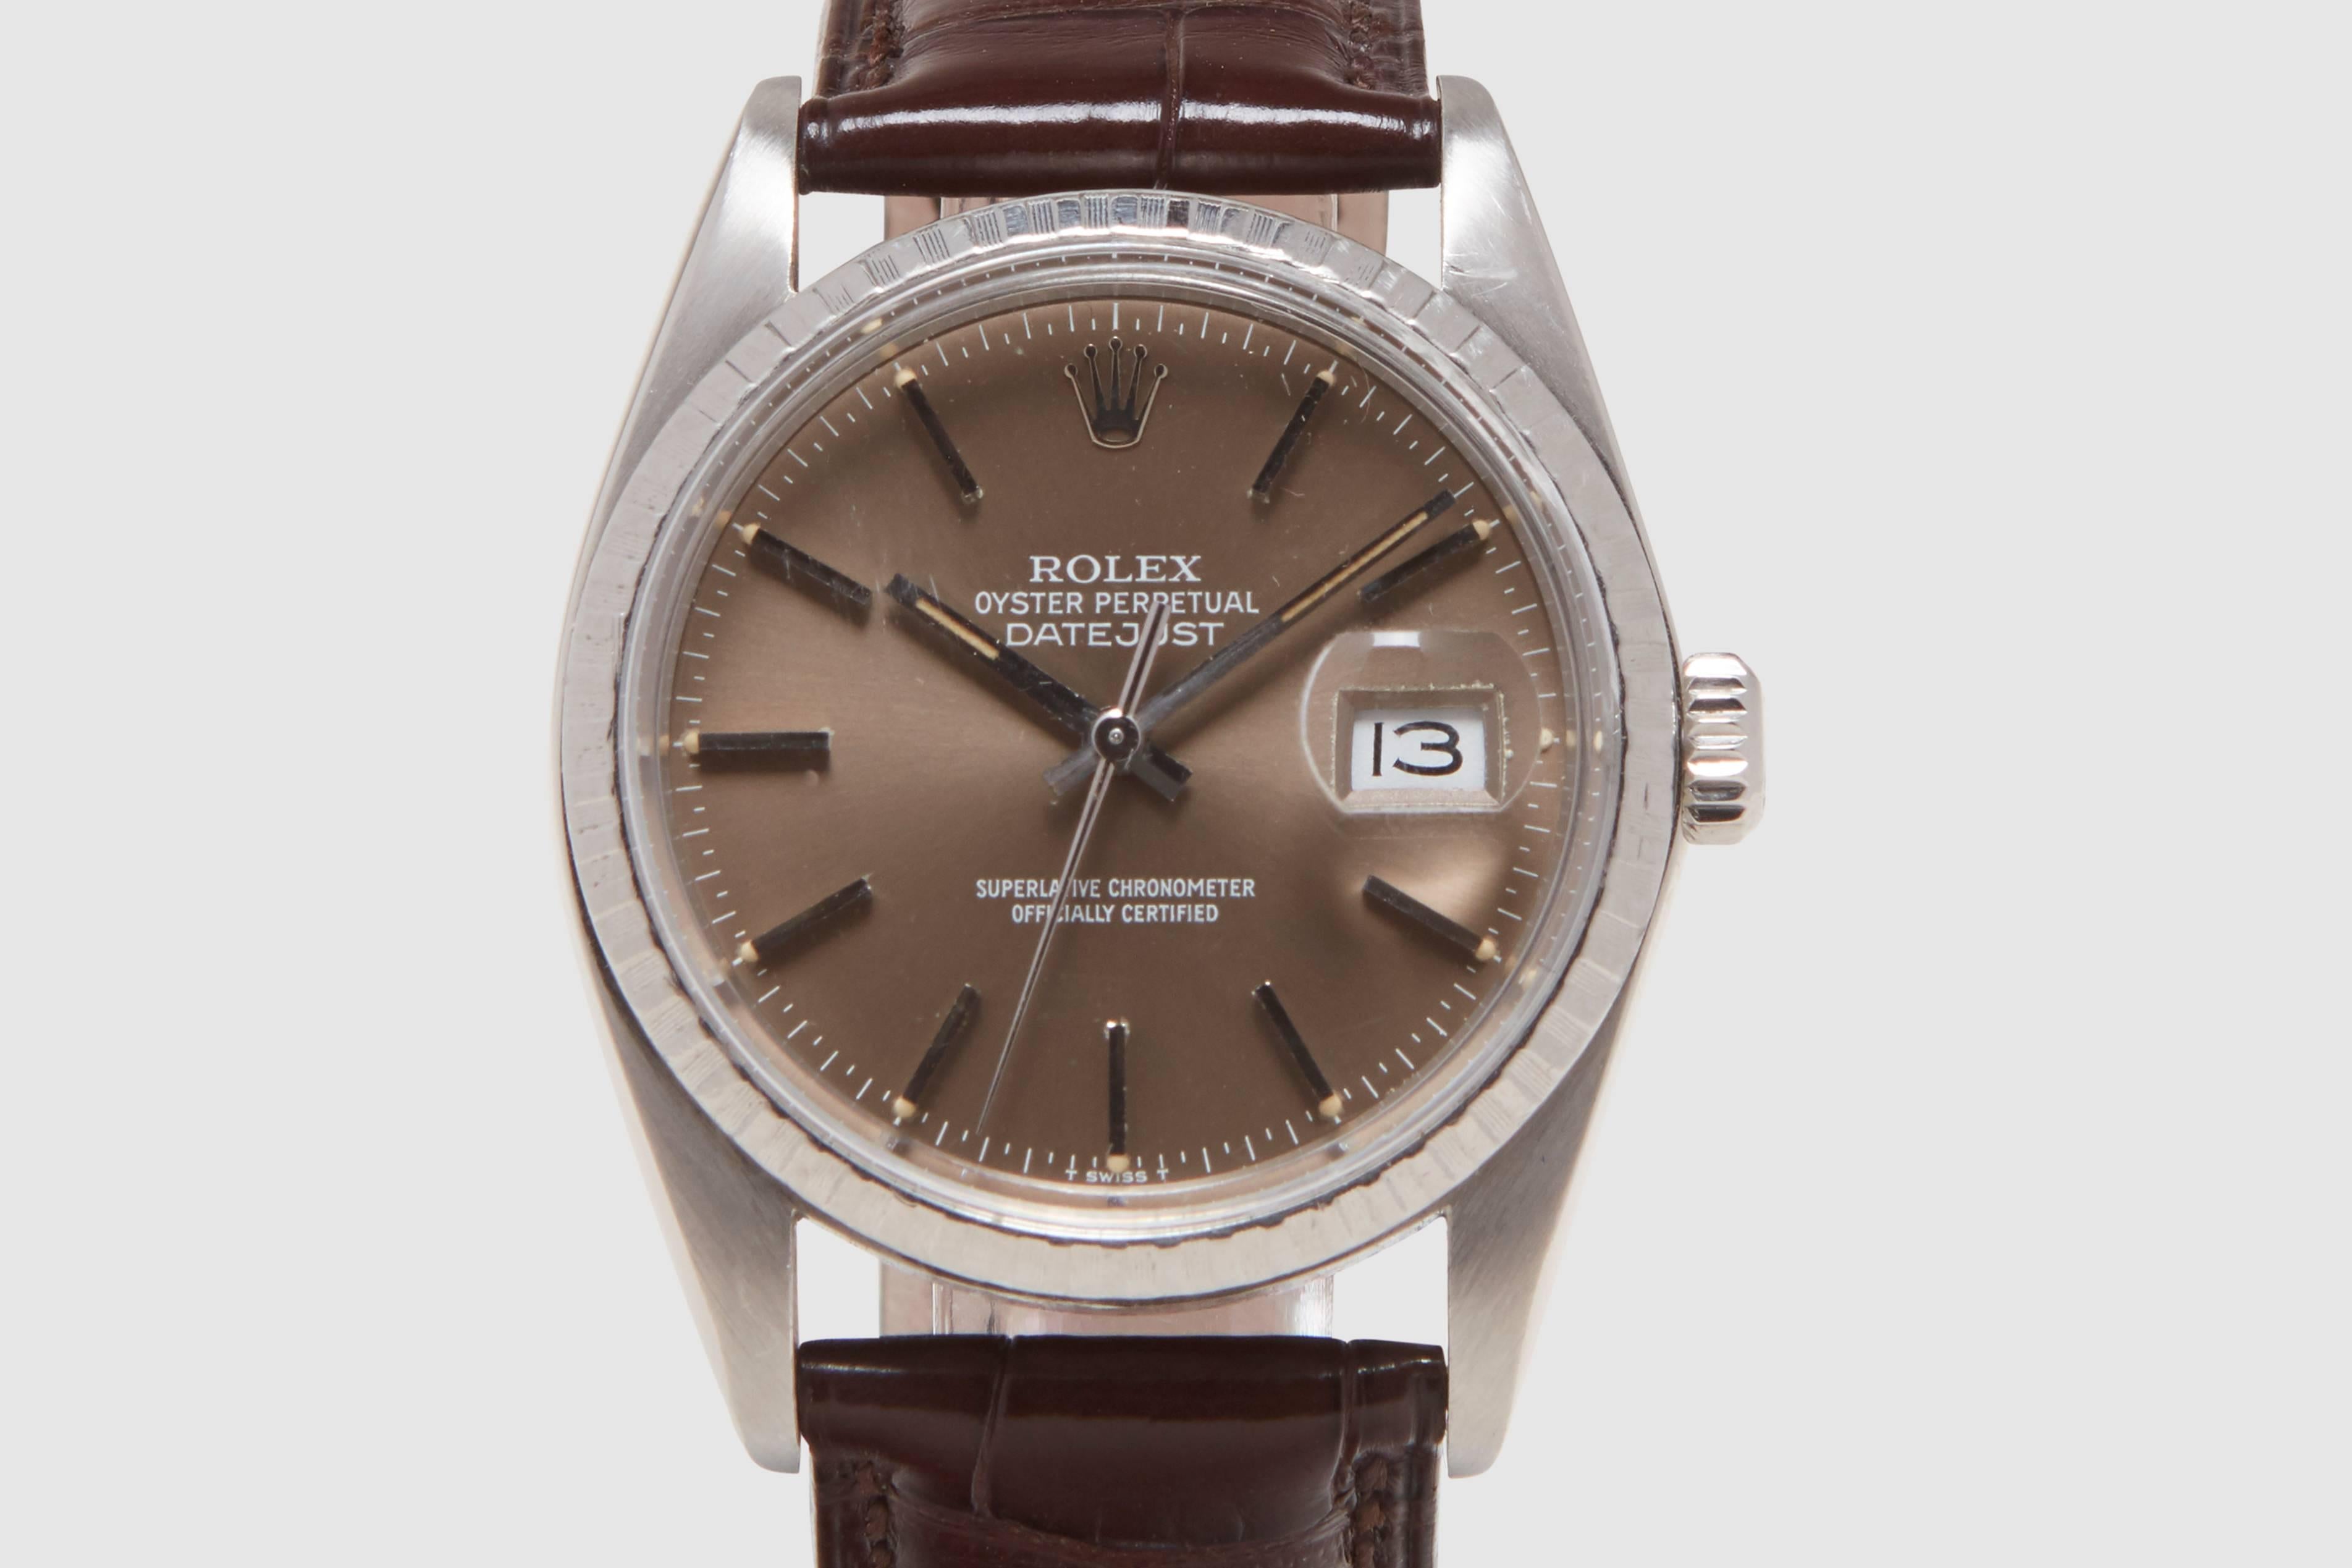 An unusual automatic stainless steel Rolex Oyster Perpetual Datejust reference 16030 model. This example has a gorgeous bronze dial with white gold stick markers. The writing and minute track are all printed in white, which pops cleanly off the